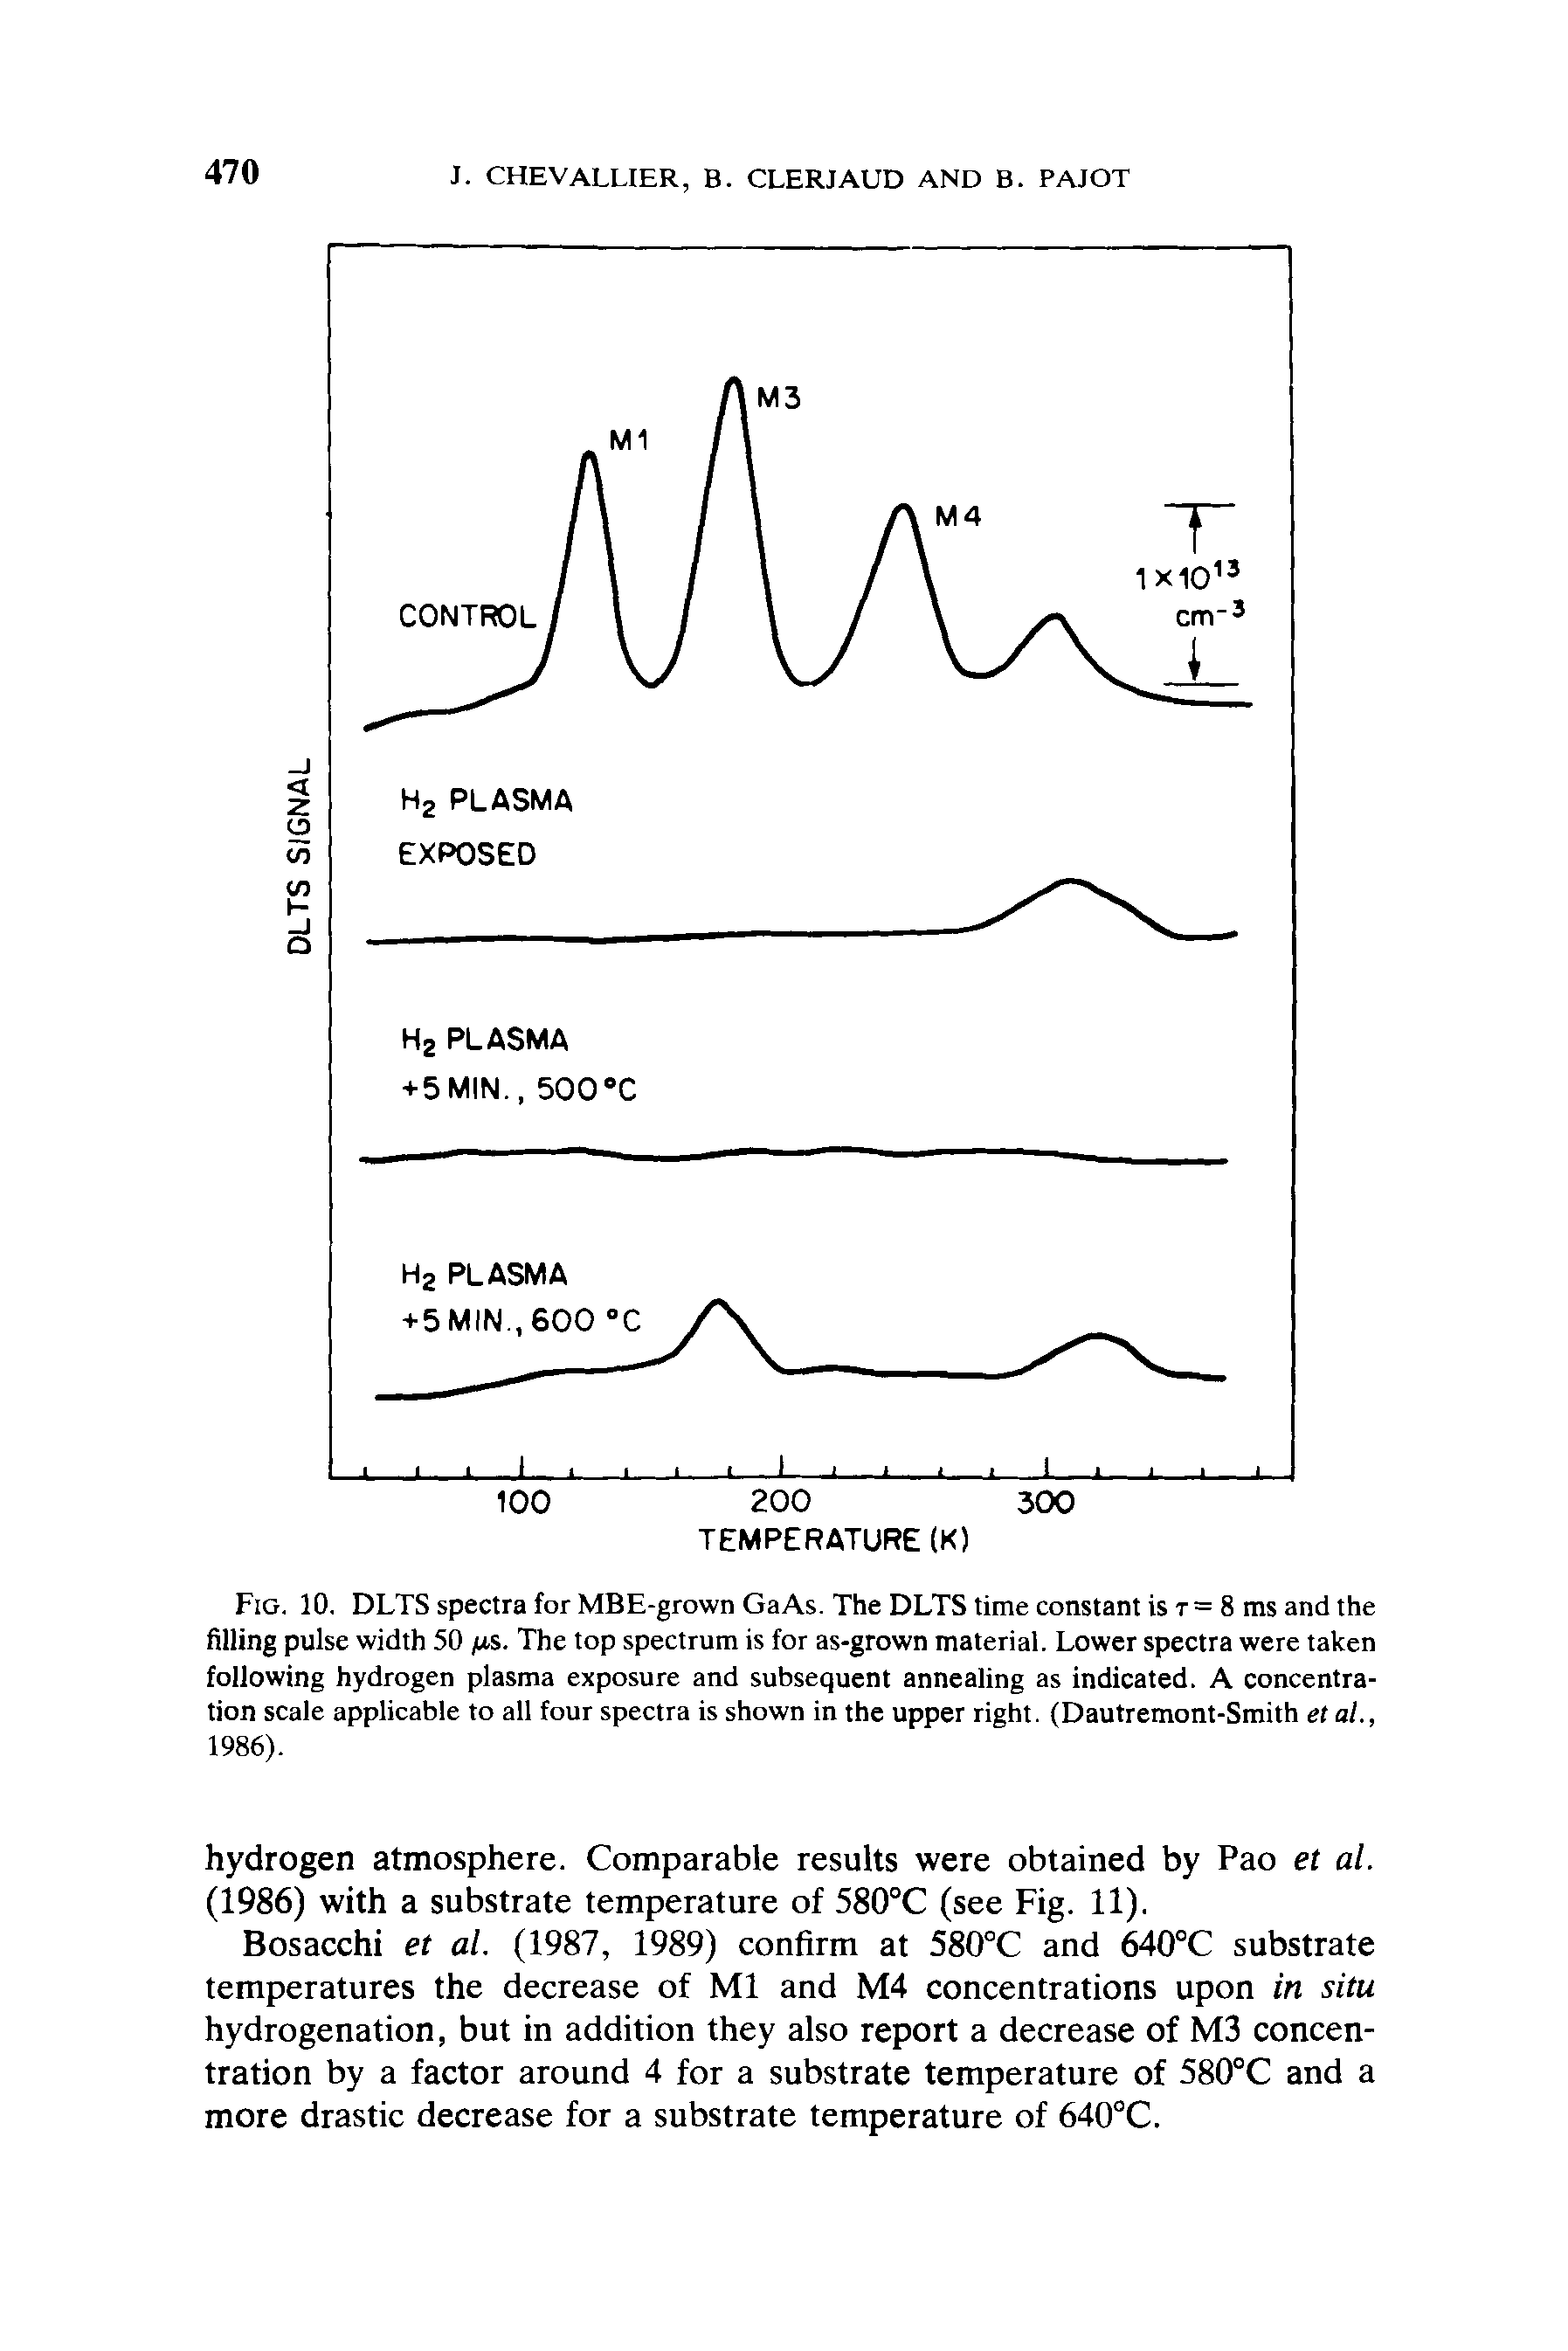 Fig. 10. DLTS spectra for MBE-grown GaAs. The DLTS time constant is r = 8 ms and the filling pulse width 50 ps. The top spectrum is for as-grown material. Lower spectra were taken following hydrogen plasma exposure and subsequent annealing as indicated. A concentration scale applicable to all four spectra is shown in the upper right. (Dautremont-Smith et al.,...